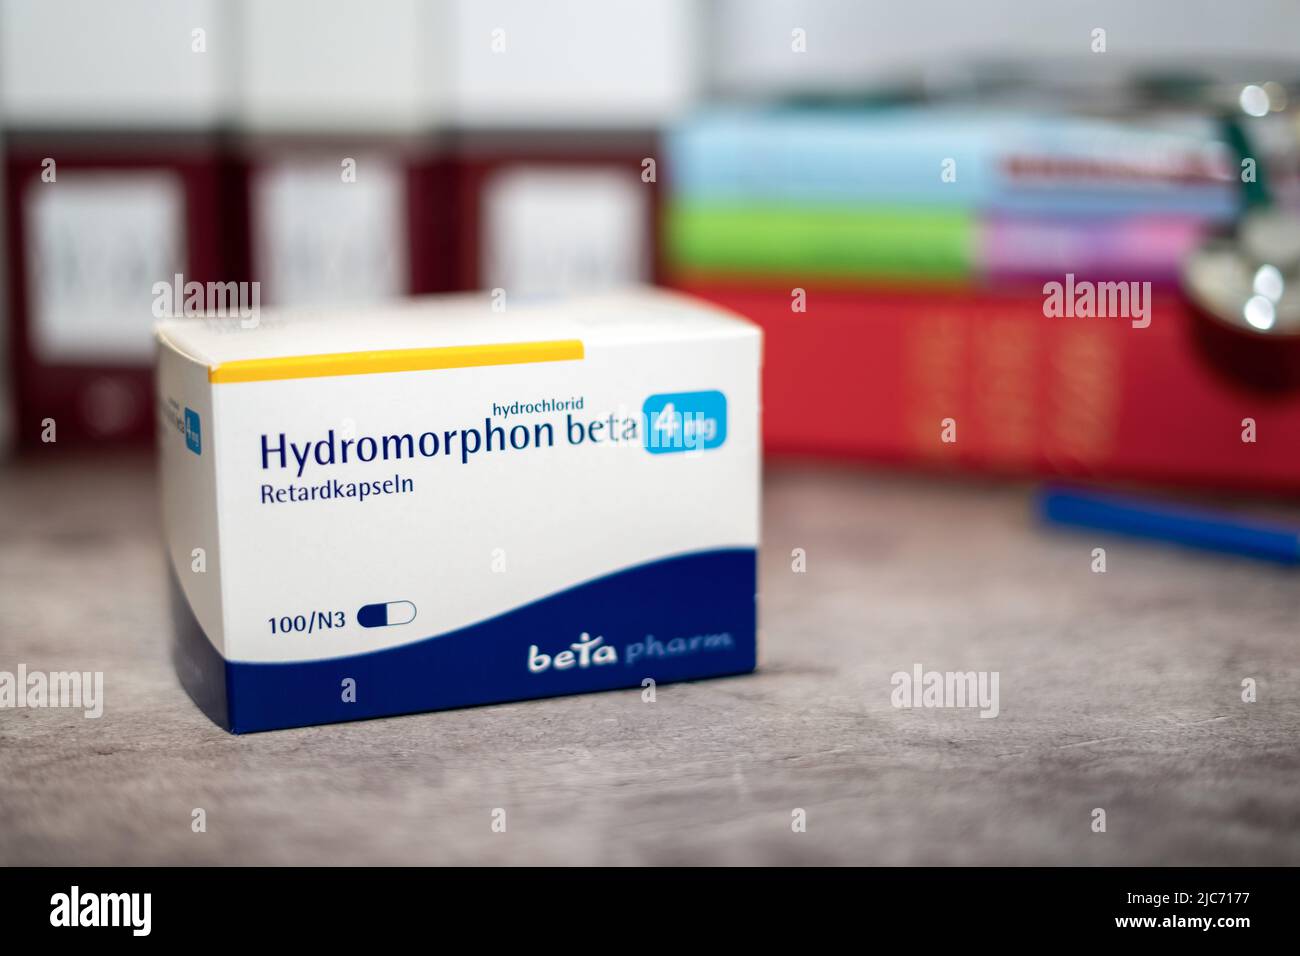 Hydromorphon drug box containing Hydromorphon recommended for pain due to cancer, on a table and in the background different medical books. Stock Photo